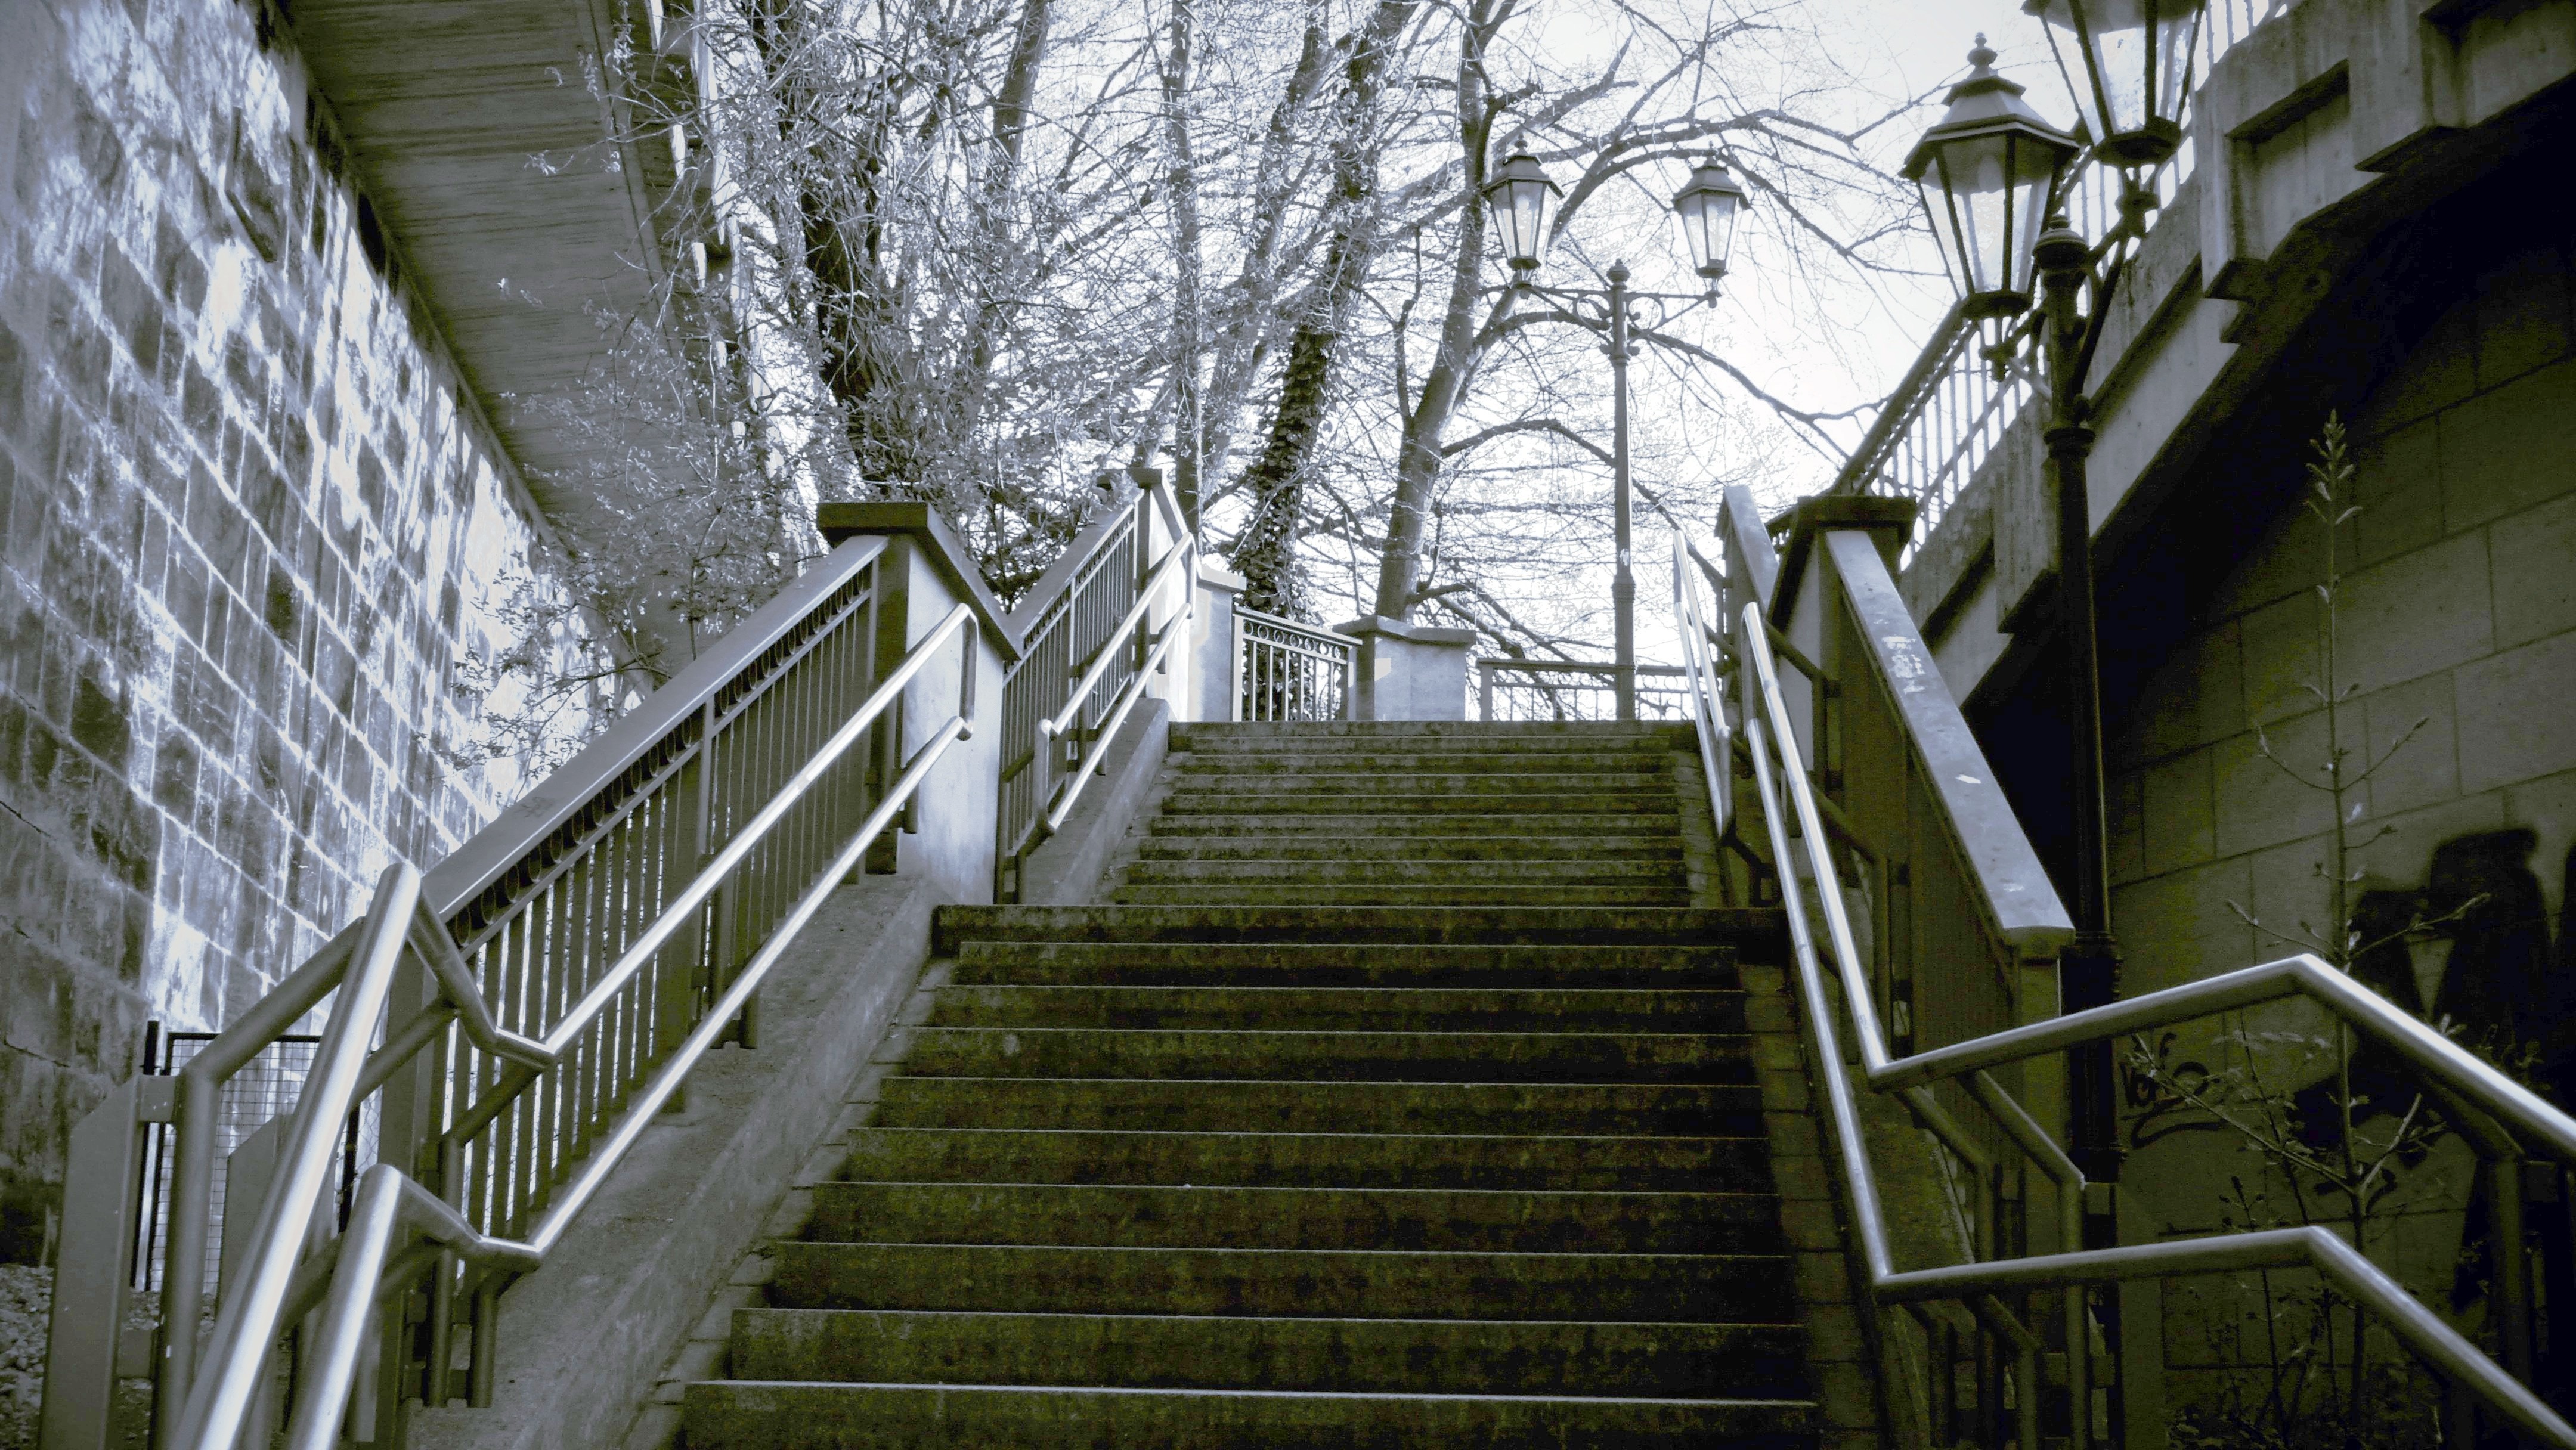 steel stair case in the park during day time